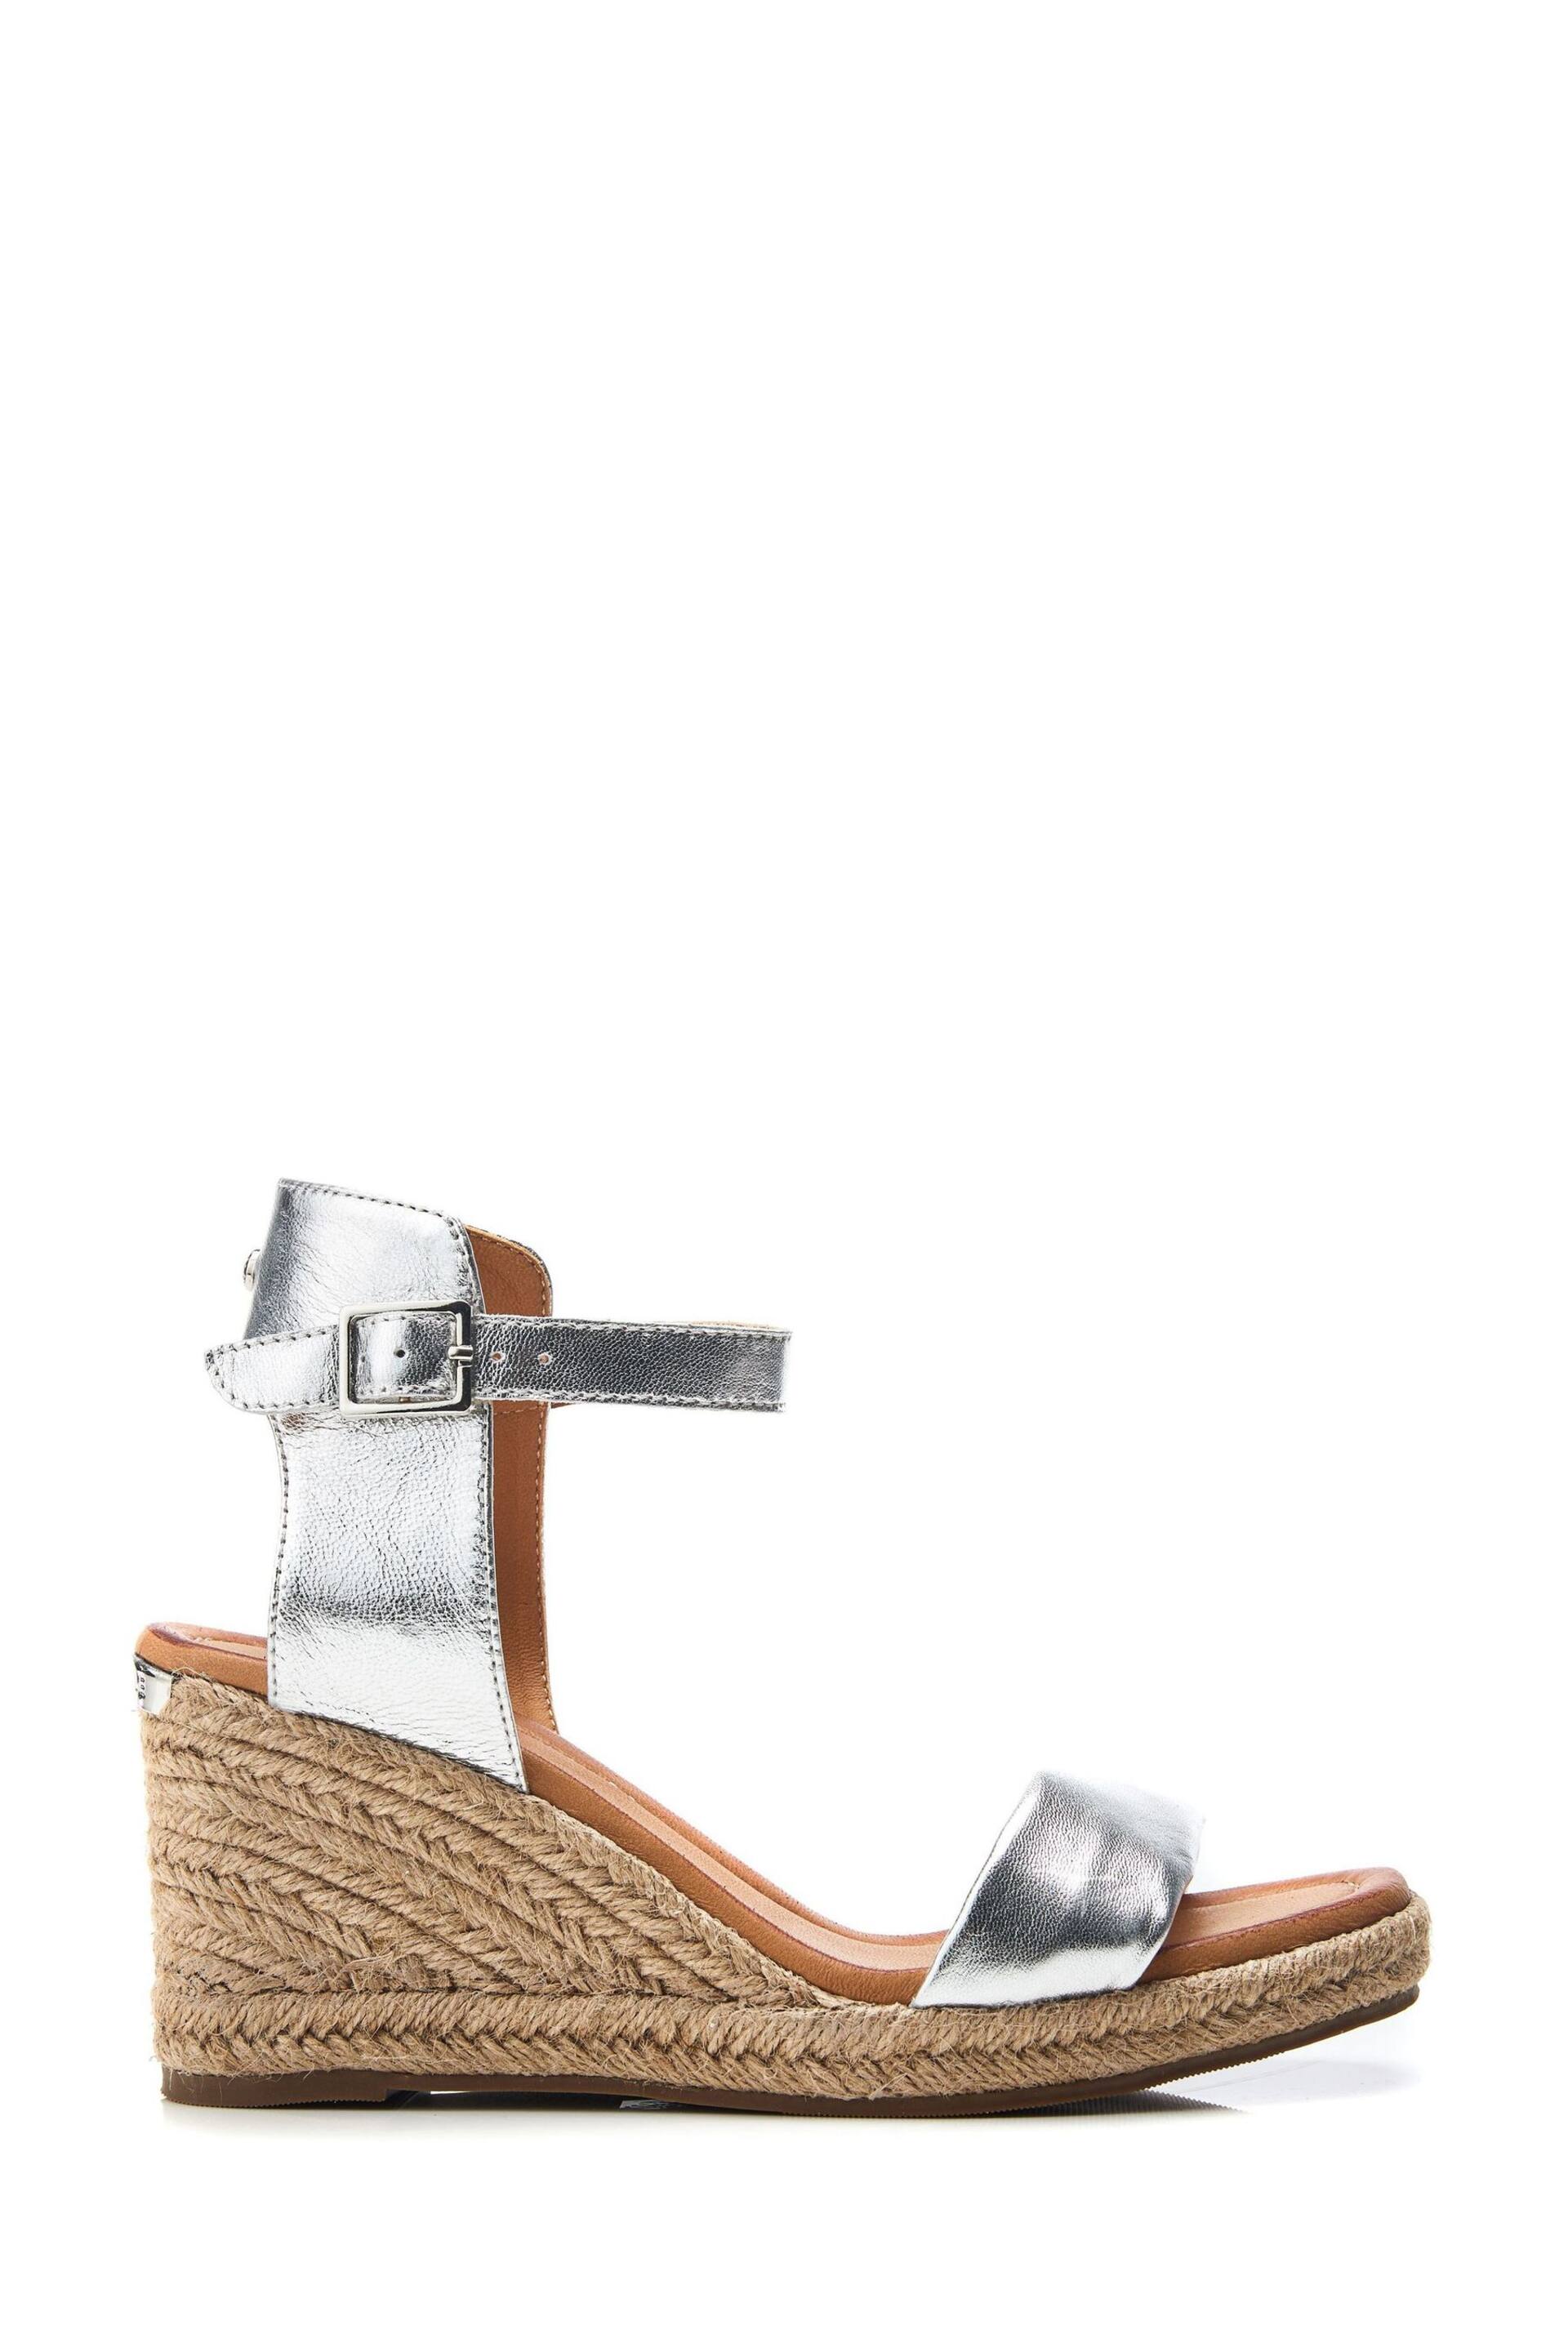 Moda in Pelle Phyllis Square Toe Two Strap Wedge Sandals - Image 1 of 4